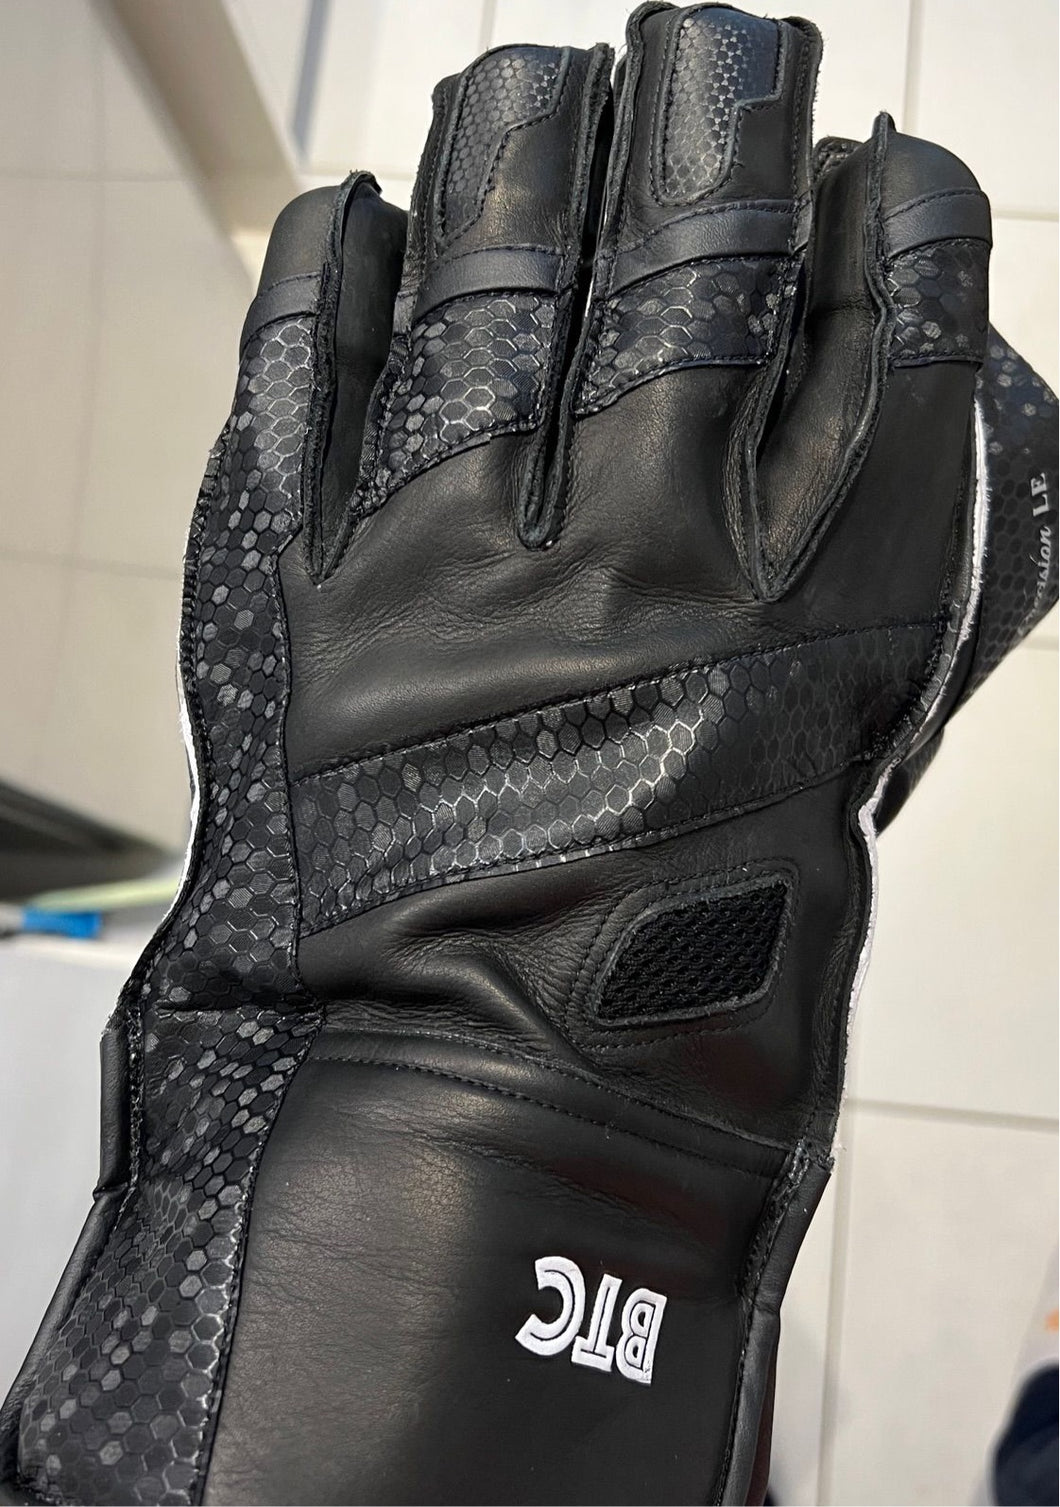 BTC Limited Edition WK Gloves